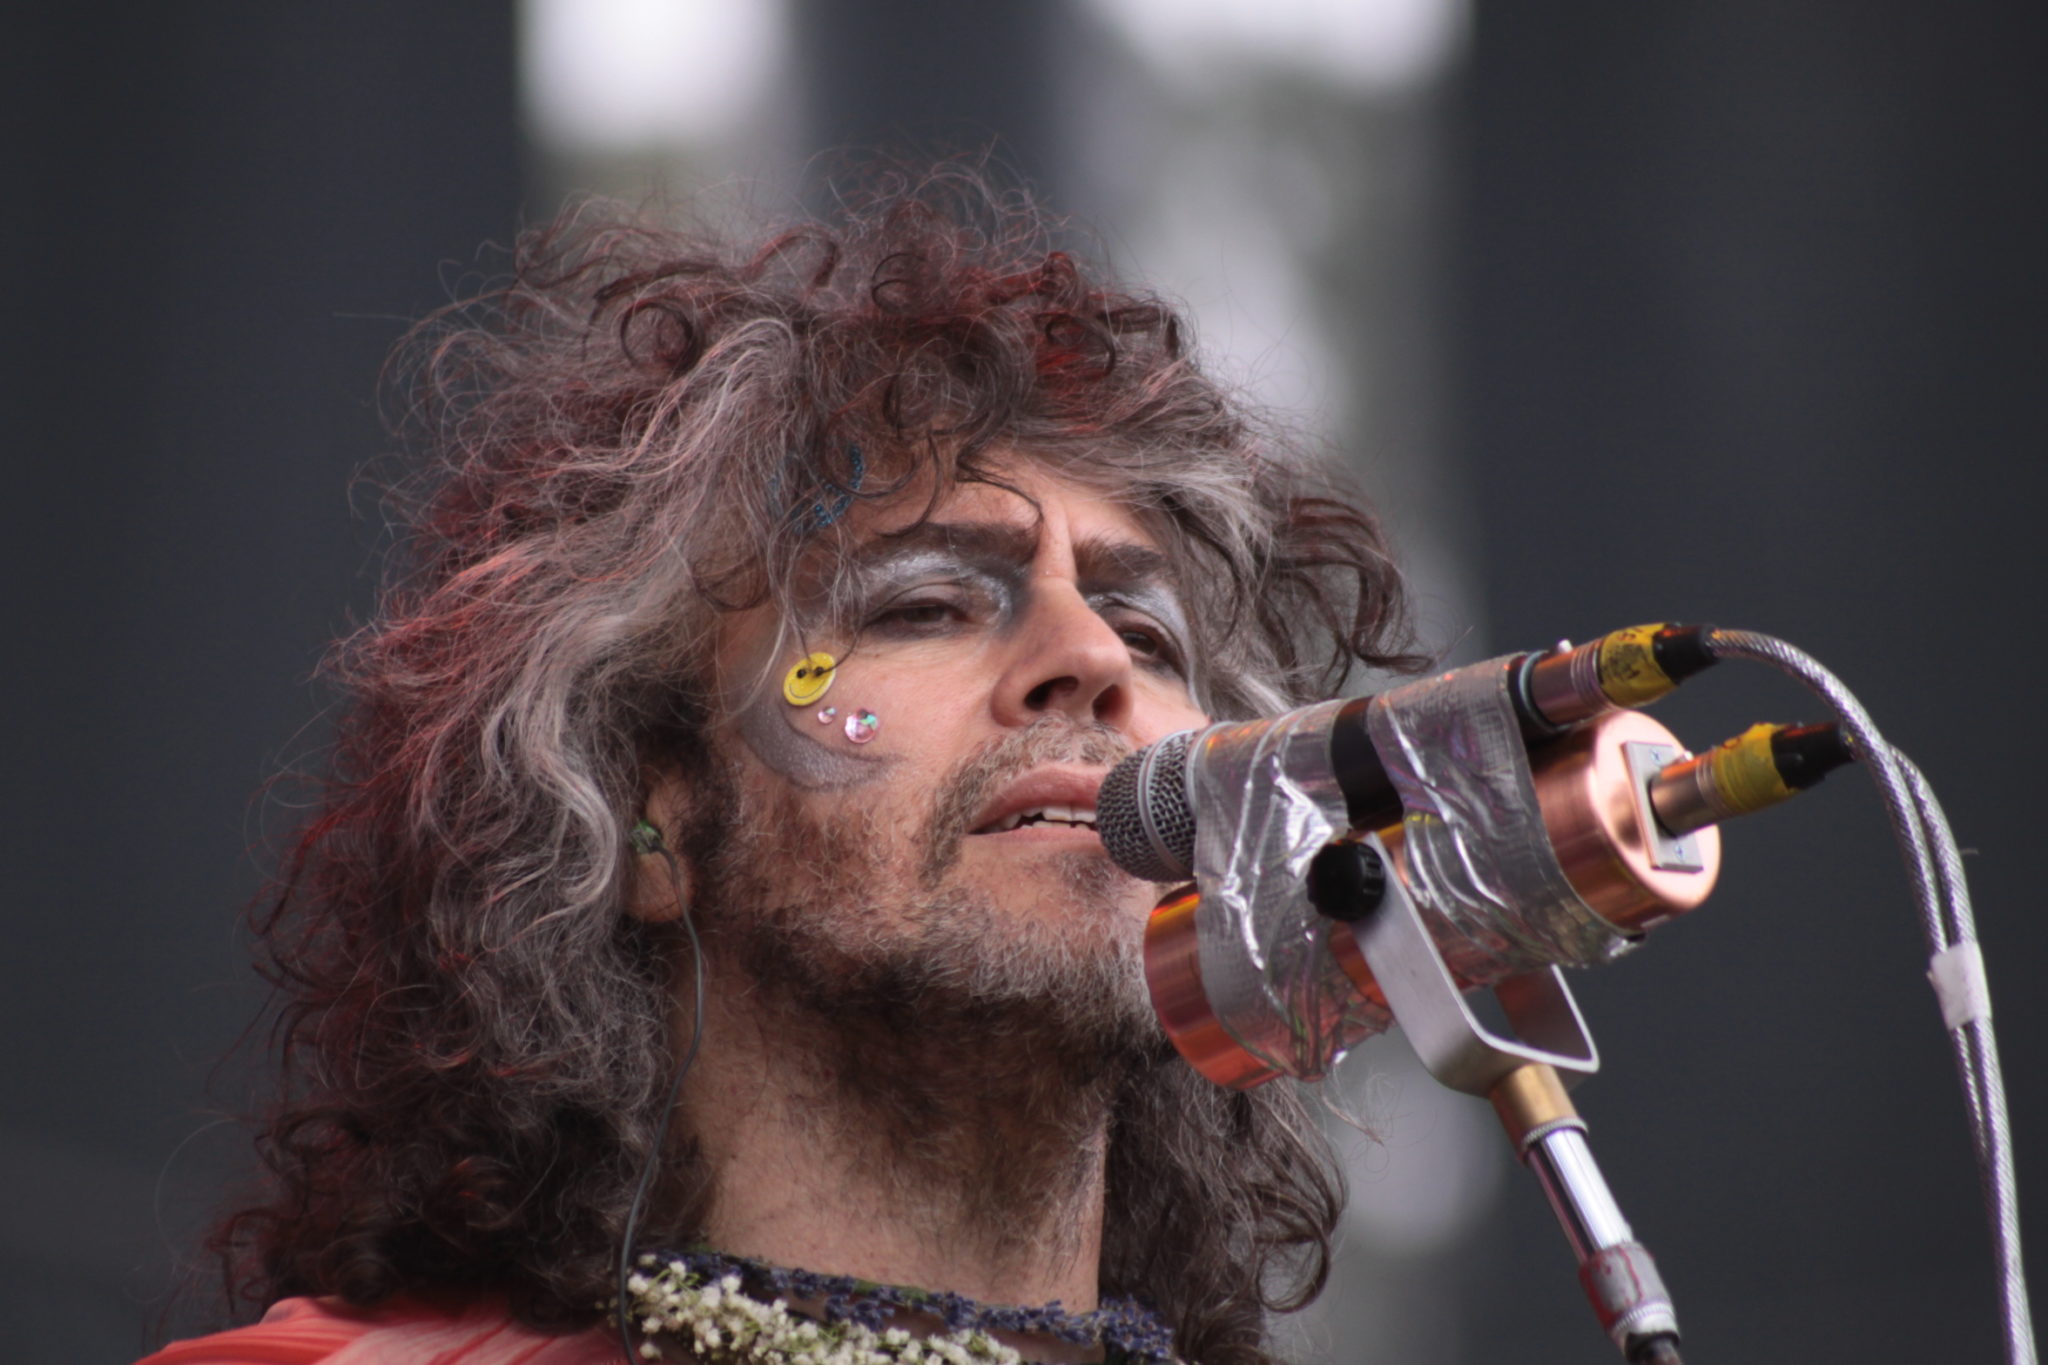 Wayne Coyne of The Flaming Lips live in concert